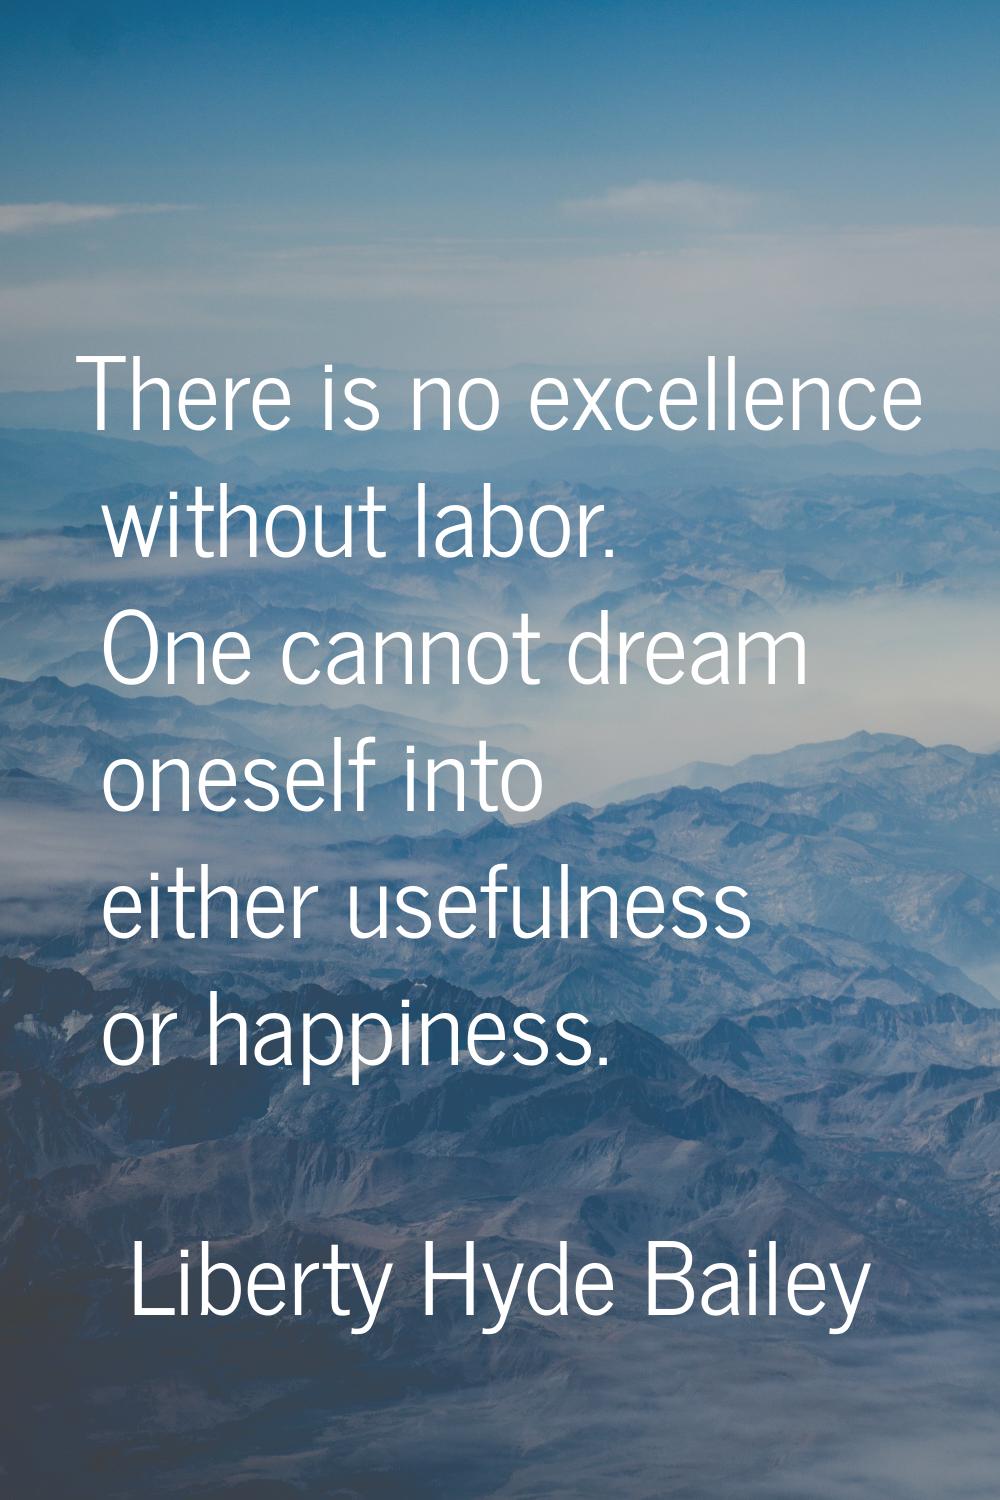 There is no excellence without labor. One cannot dream oneself into either usefulness or happiness.